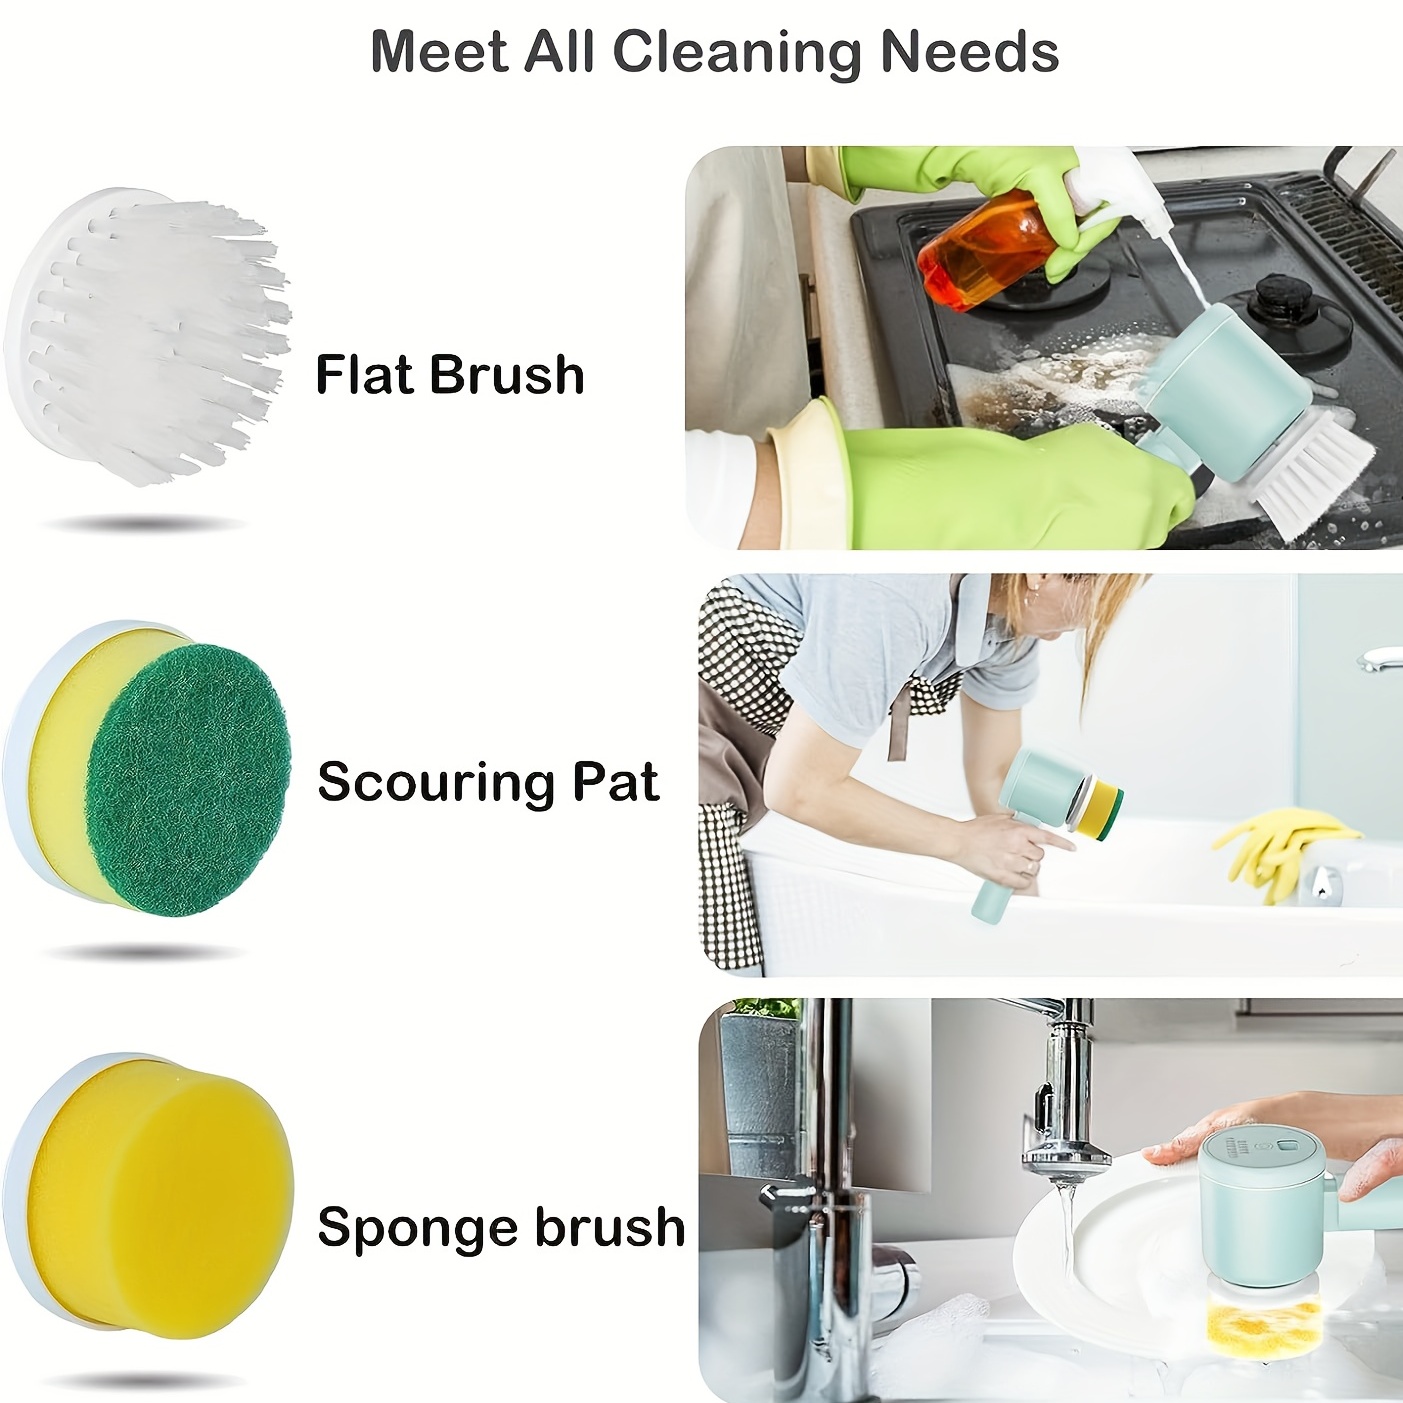 Electric Cleaning Brush , Cordless Electric Scrubber for  Kitchen,Bathroom,Shower Door,Bathtub,Mirror,Tile,Tub,Dish,Sink,Grout  Handheld Household Motorized Brush 